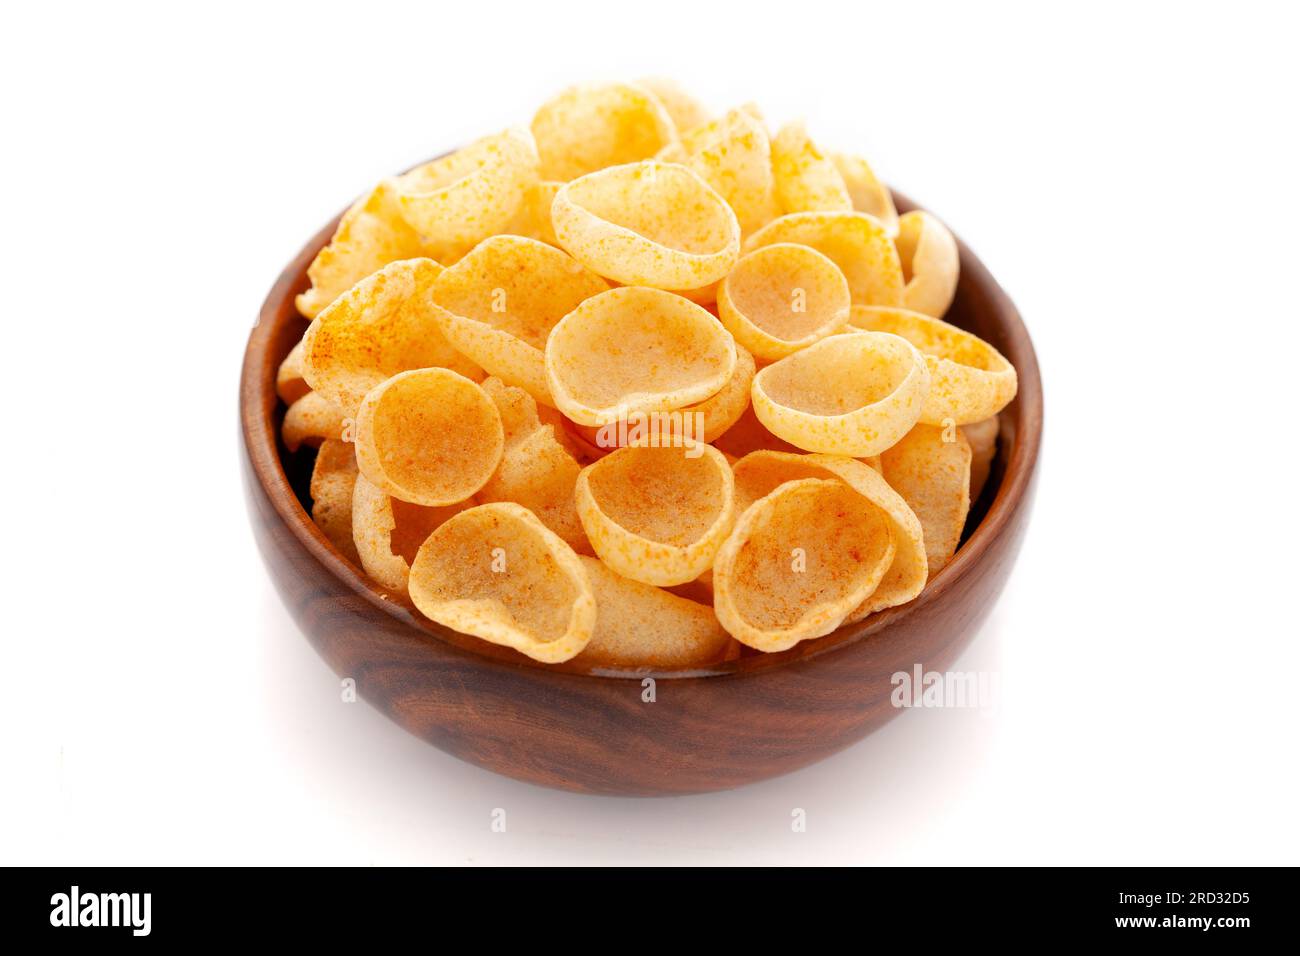 Cheese Puff Balls in Wooden Bowl on Light Background Stock Image - Image of  fried, cereal: 133510255